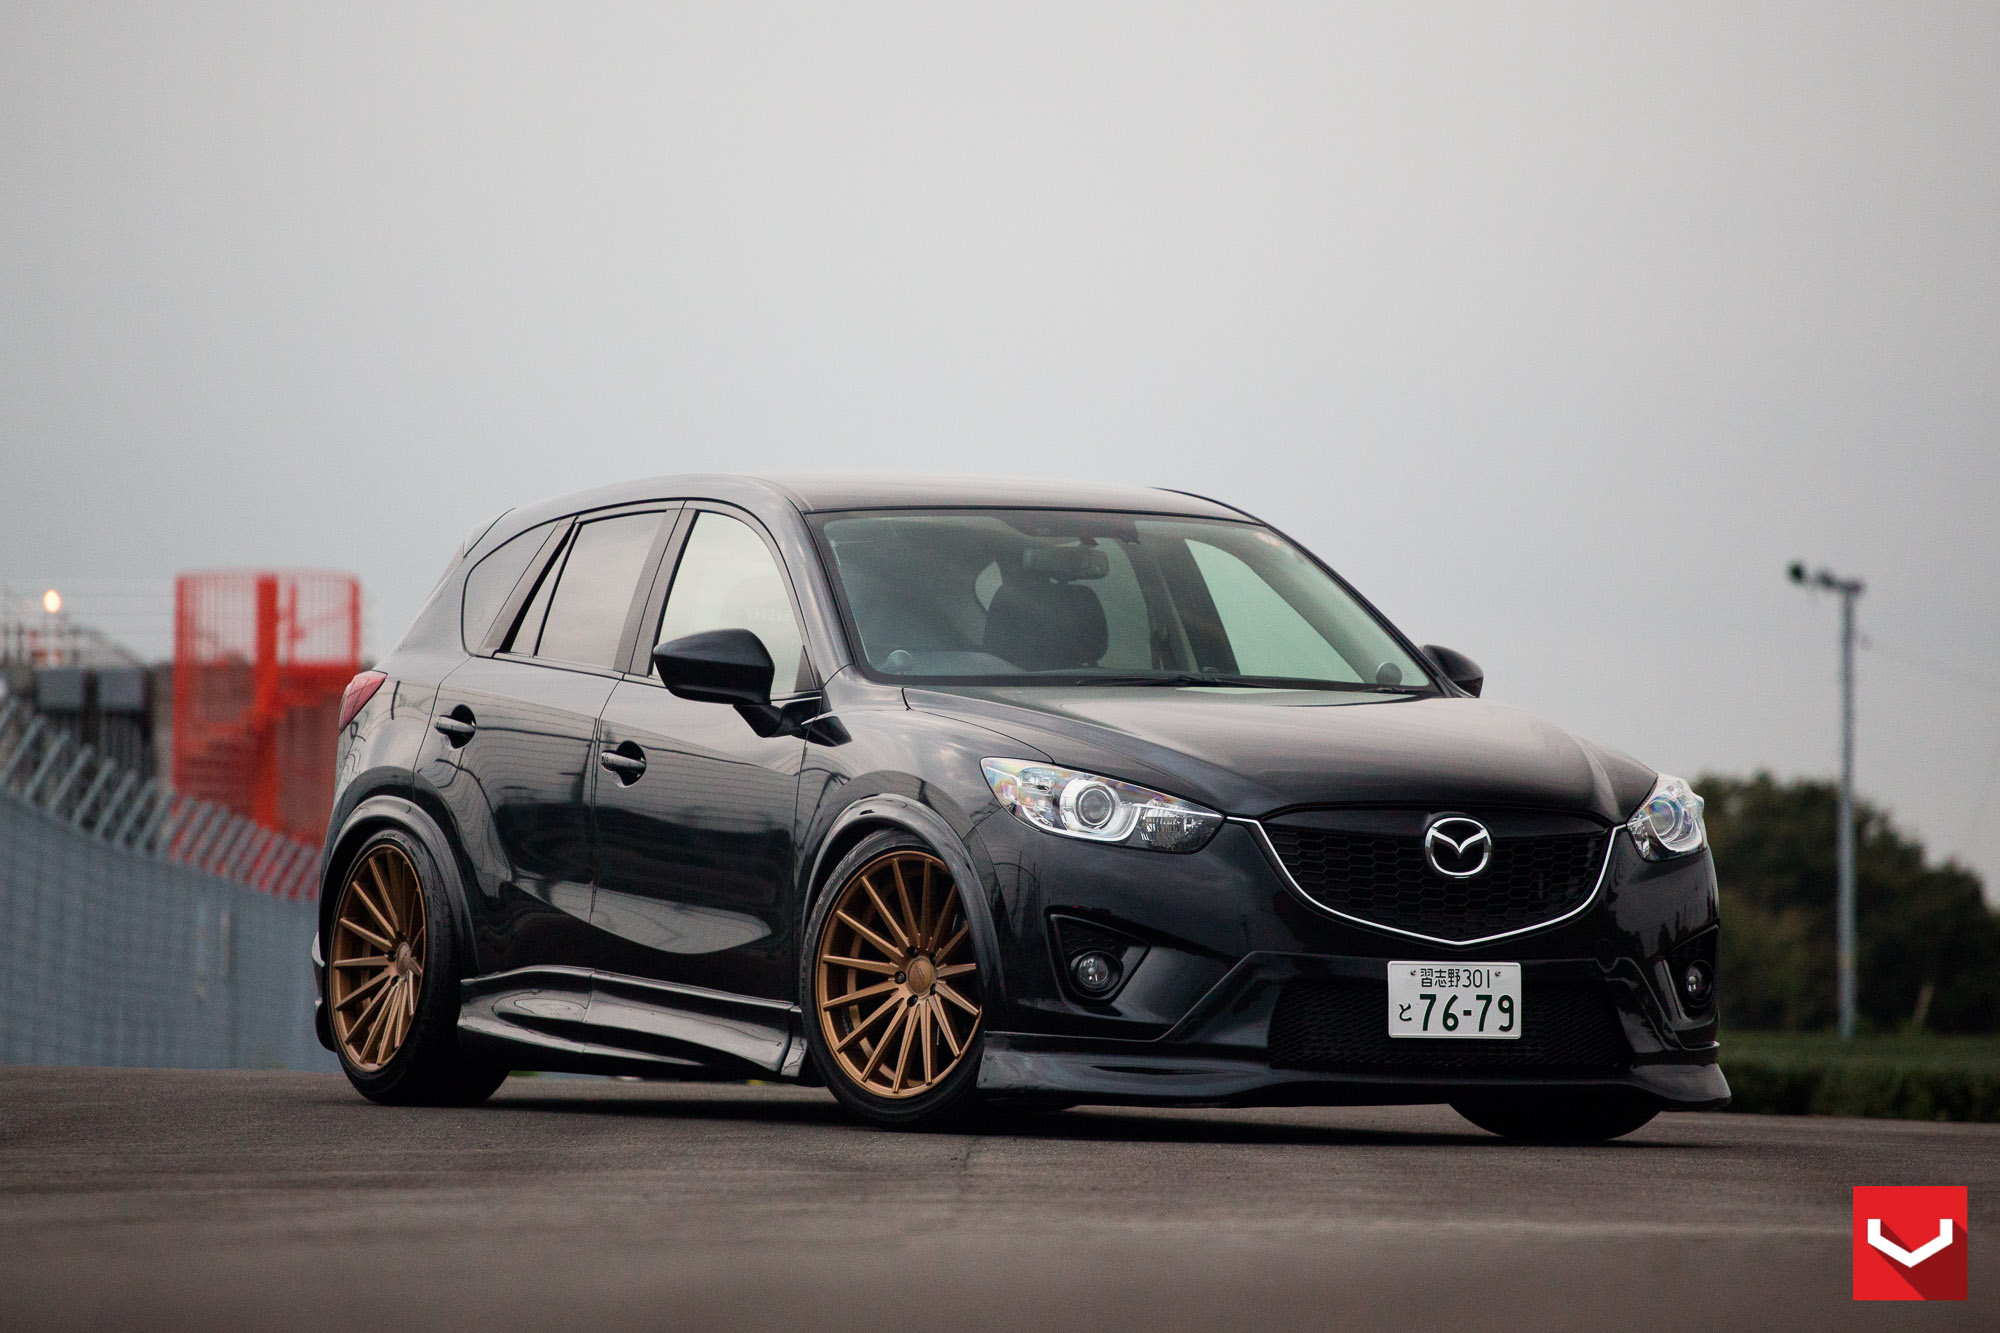 https://s1.cdn.autoevolution.com/images/news/mazda-cx-5-tuned-with-vossen-wheels-and-air-suspension-photo-gallery-93288_1.jpg